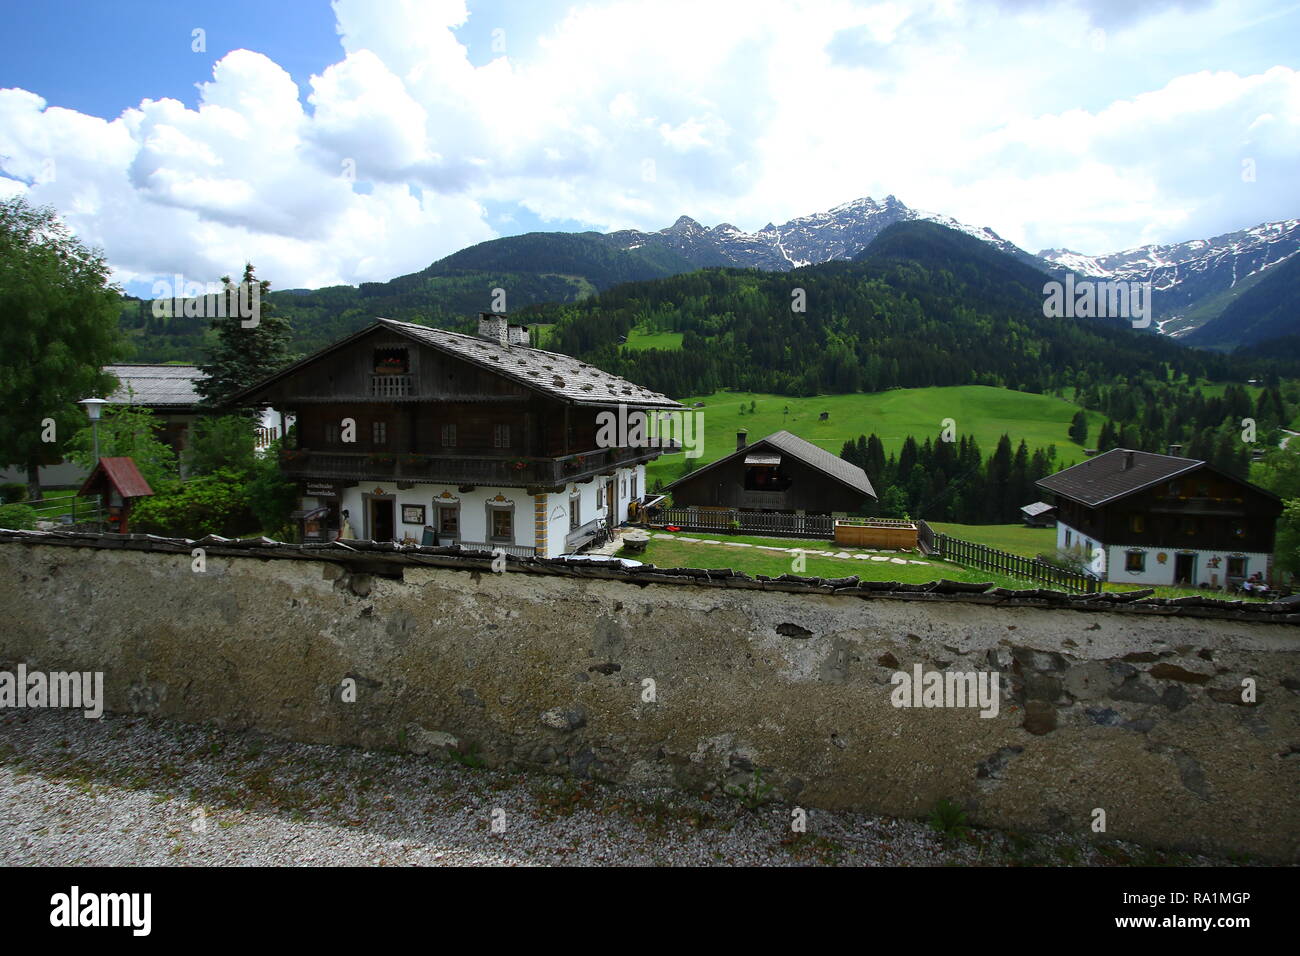 Lesachtal in Carinthia. Together with the villages of Liesing, Maria Luggau, St. Jakob, Birnbaum and St. Lorenzen. Wild Austria Europe. Stock Photo